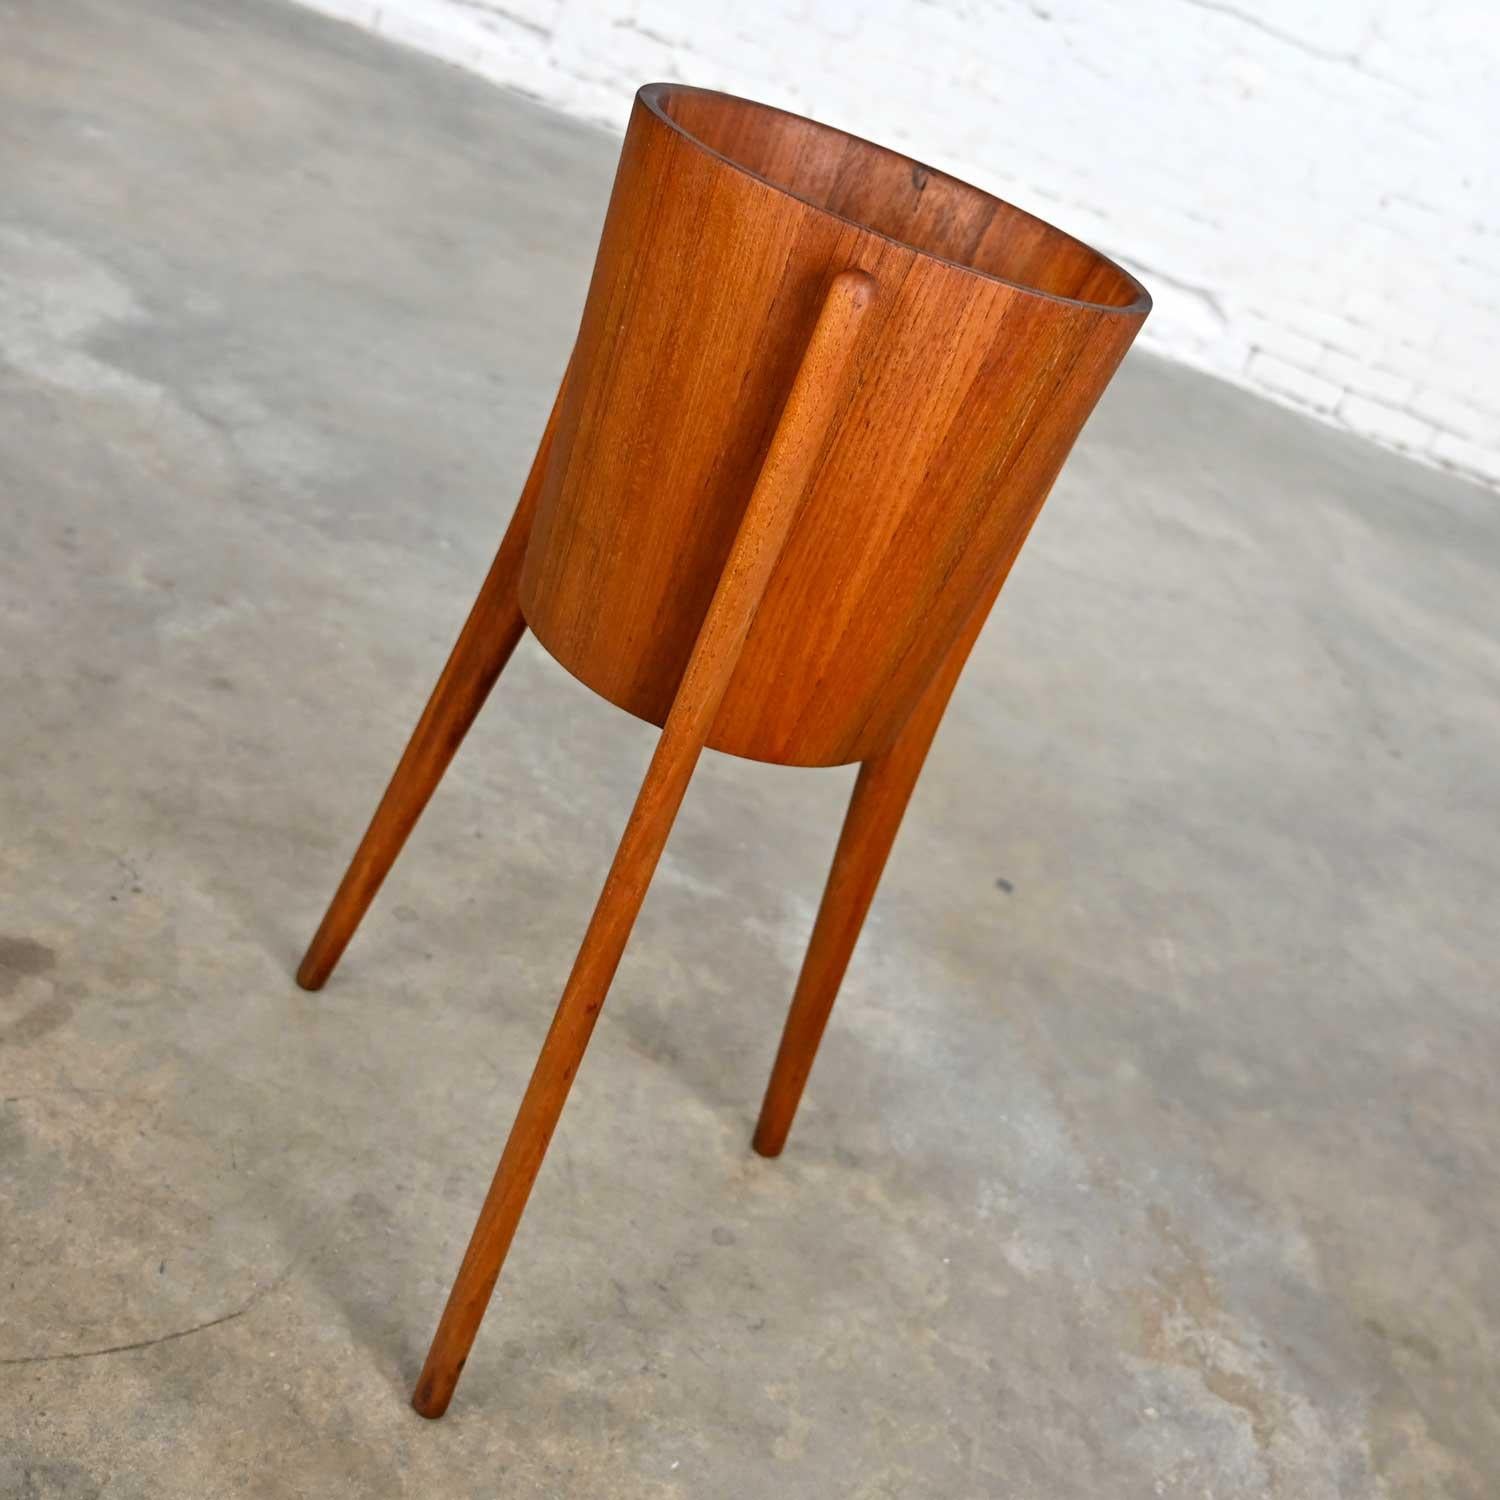 Awesome vintage teak Scandinavian Modern tri-leg standing bucket shaped planter. Beautiful condition, keeping in mind that this is vintage and not new so will have signs of use and wear. Open joints were glued, some patching of teak in interior,